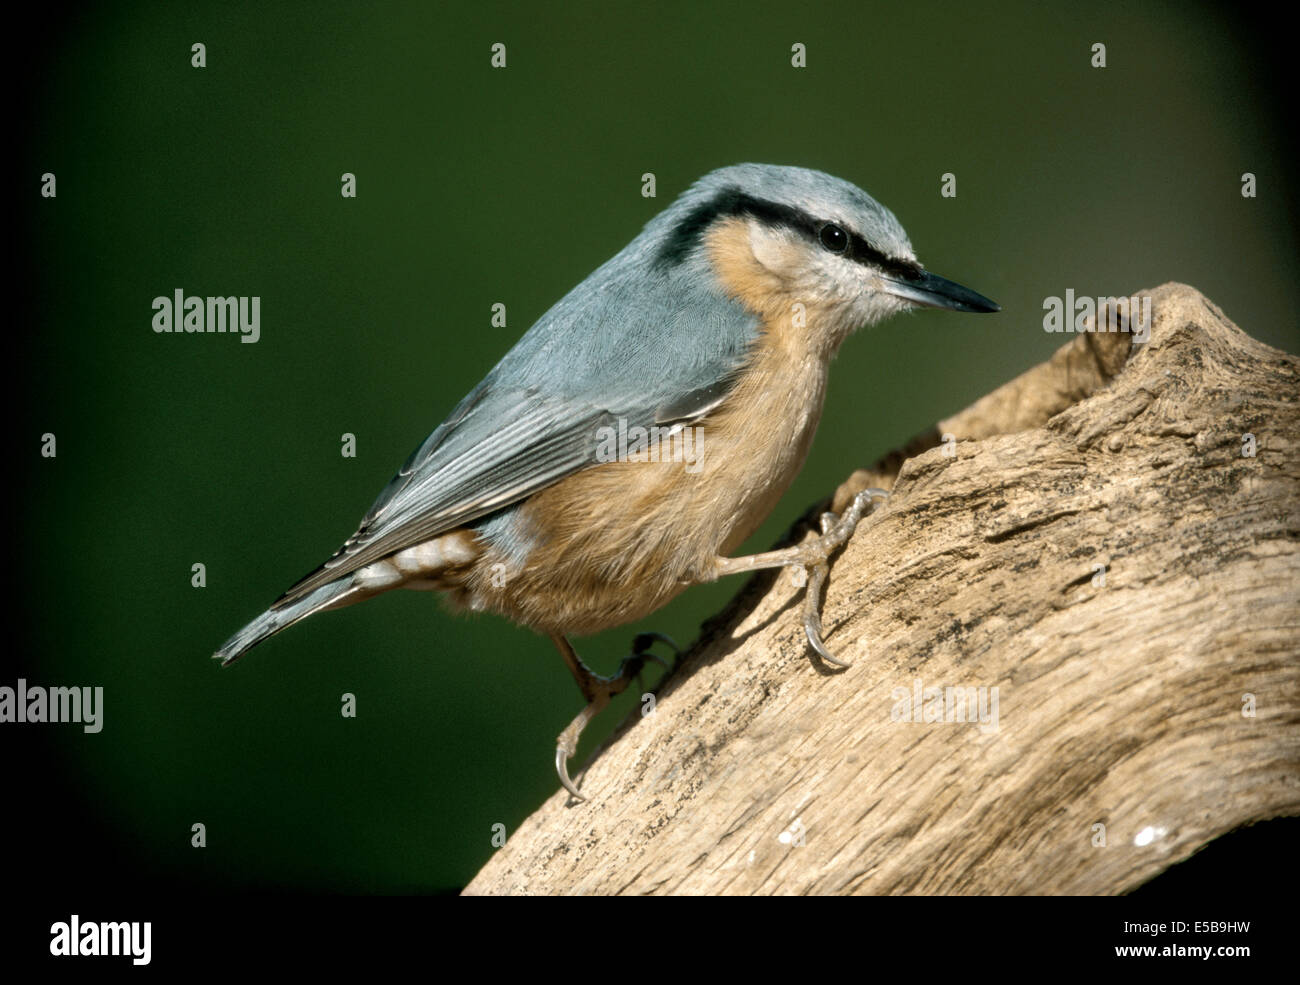 Nuthatch Sitta europaea L 14cm. Dumpy, short-tailed woodland bird that often descends tree trunks head-first. Sexes are similar. Stock Photo